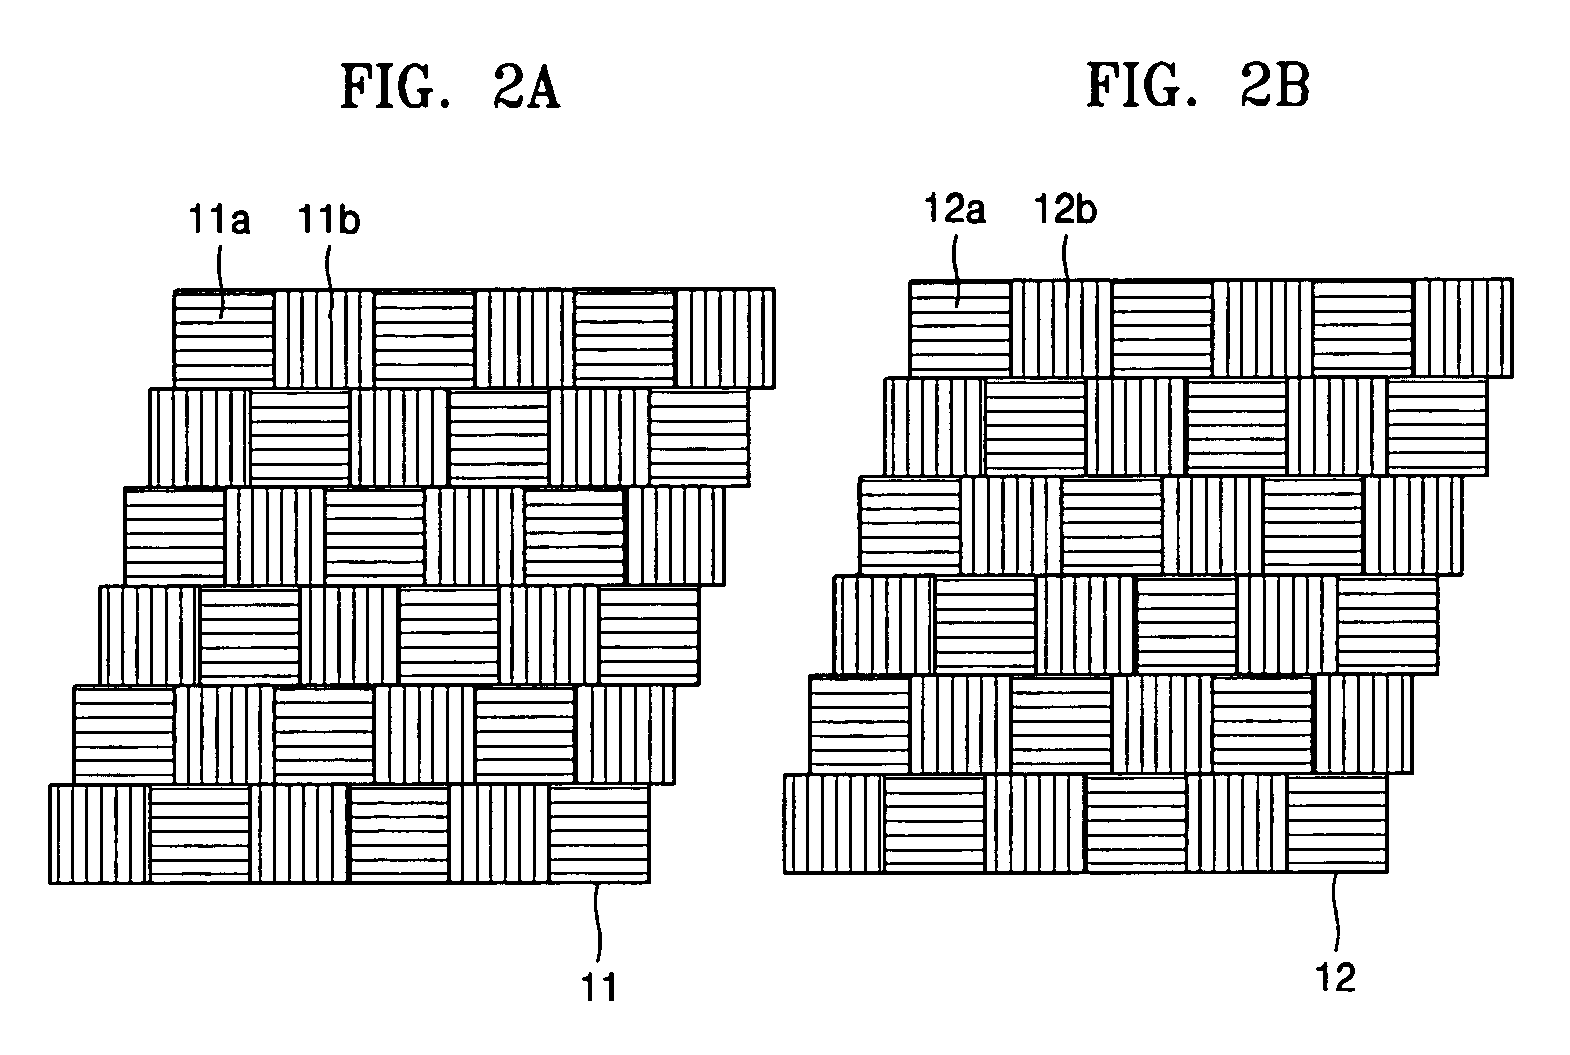 Stereoscopic display switching between 2D/3D images using polarization grating screen